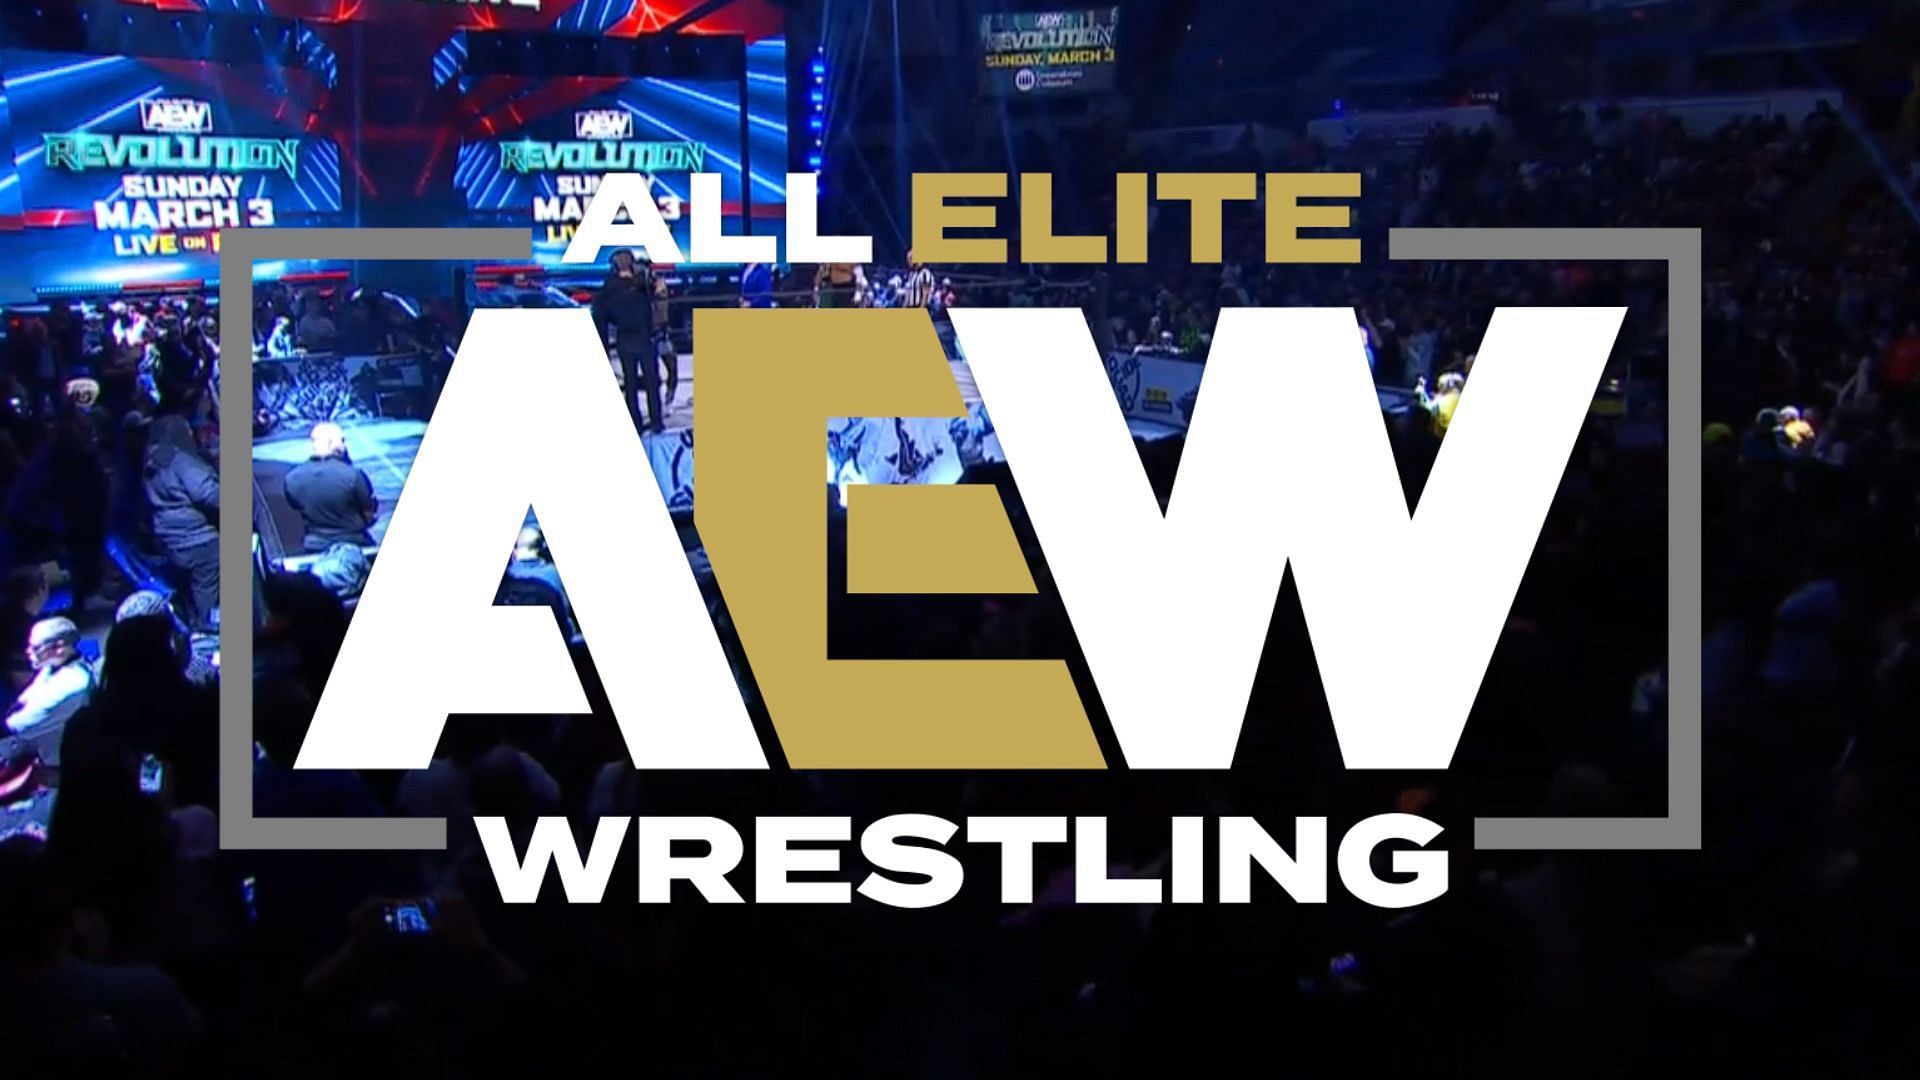 All Elite Wrestling is a Jacksonville-based promotion led by Tony Khan [Photo courtesy of Screenshot from Triller TV